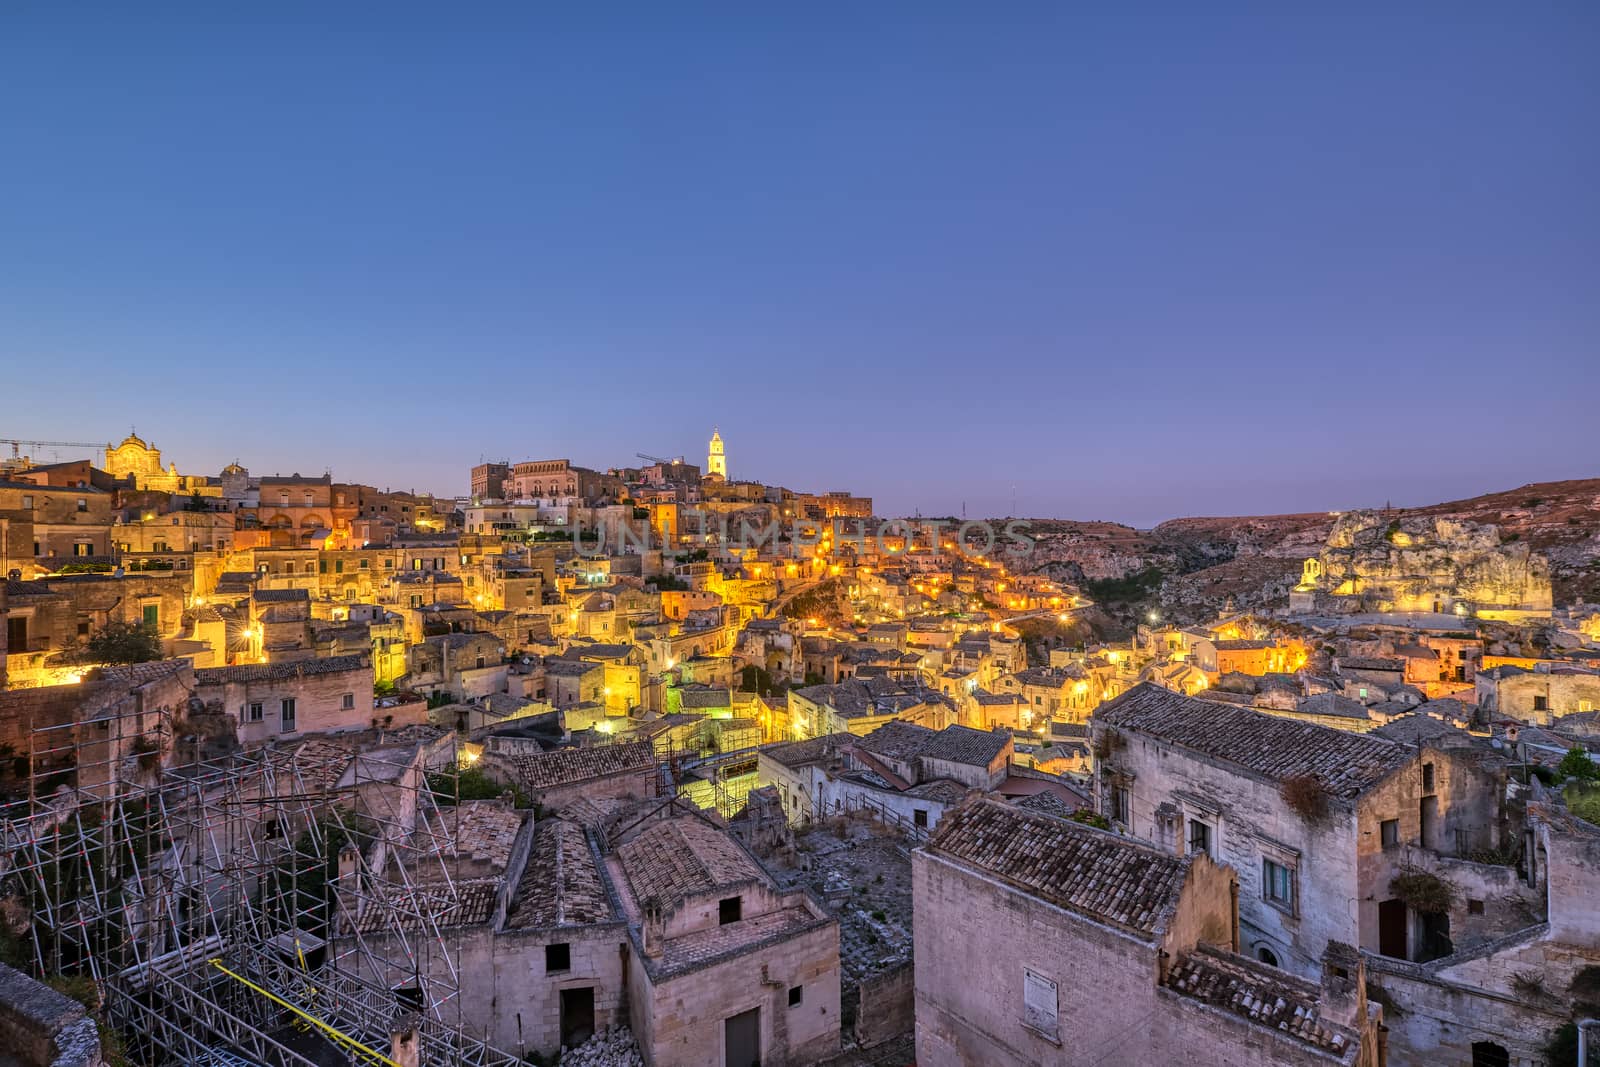 The old town of Matera in southern Italy at dusk